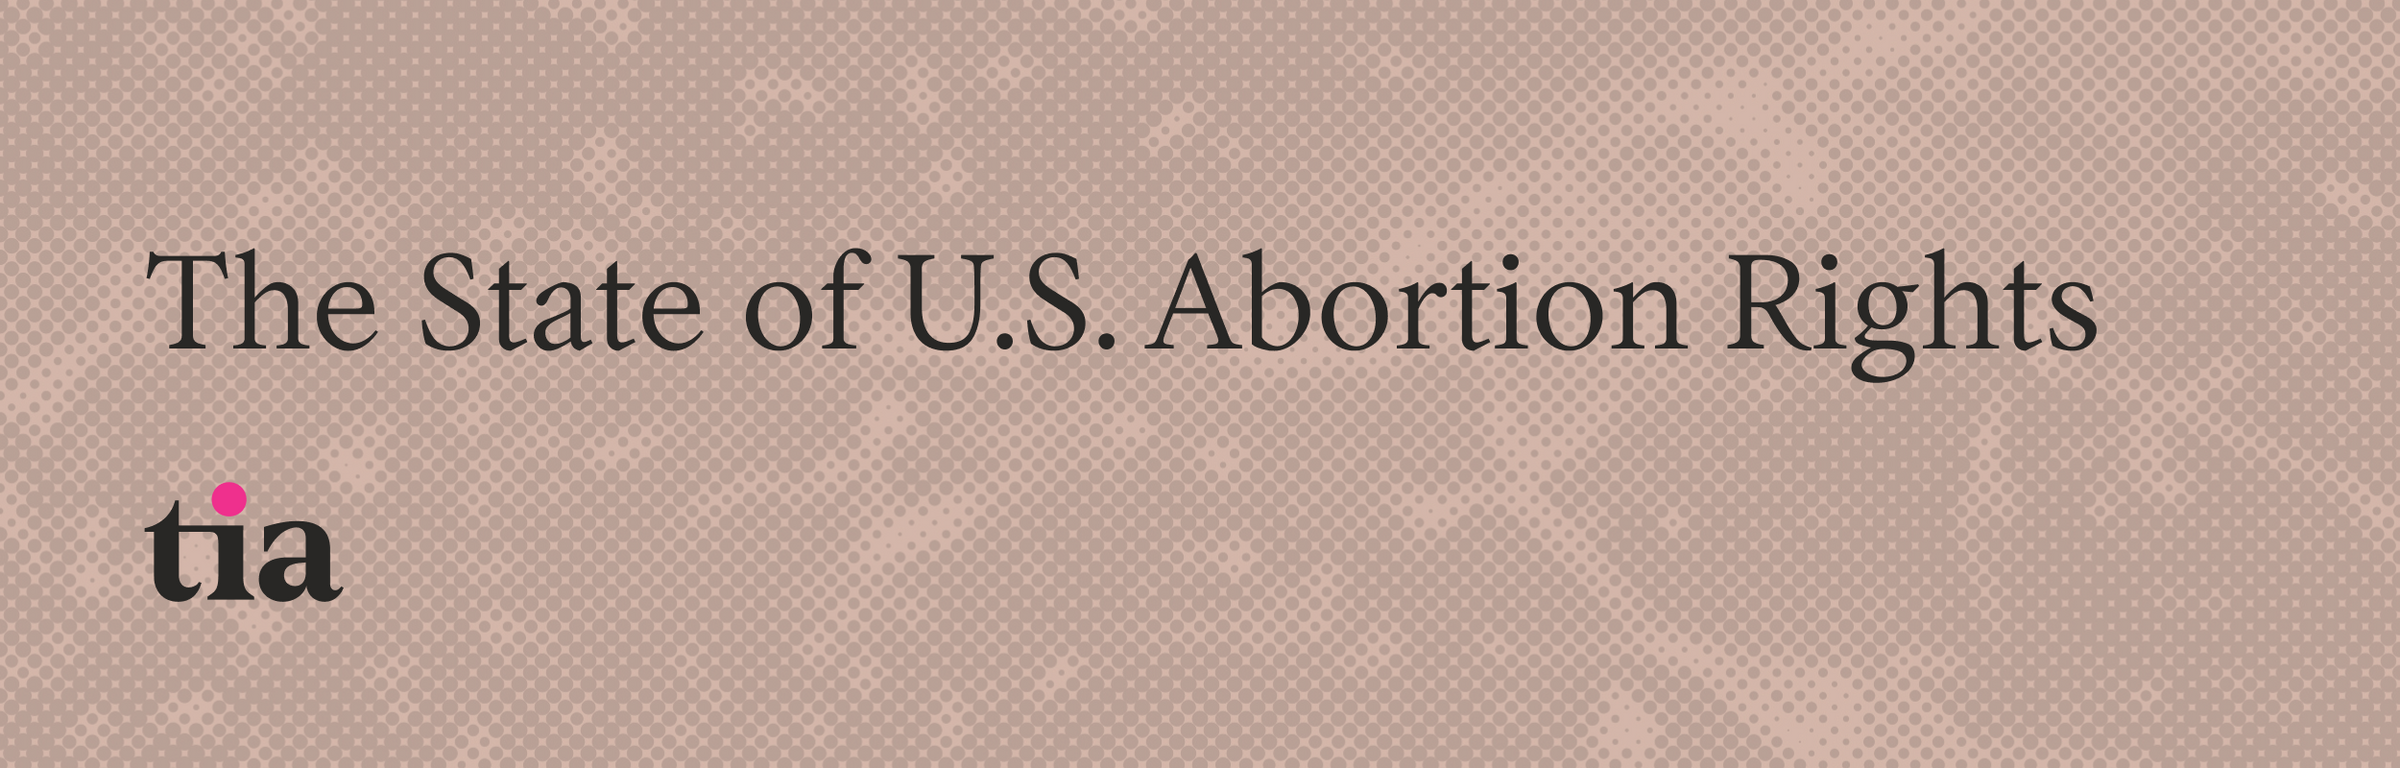 The State of U.S. Abortion Rights